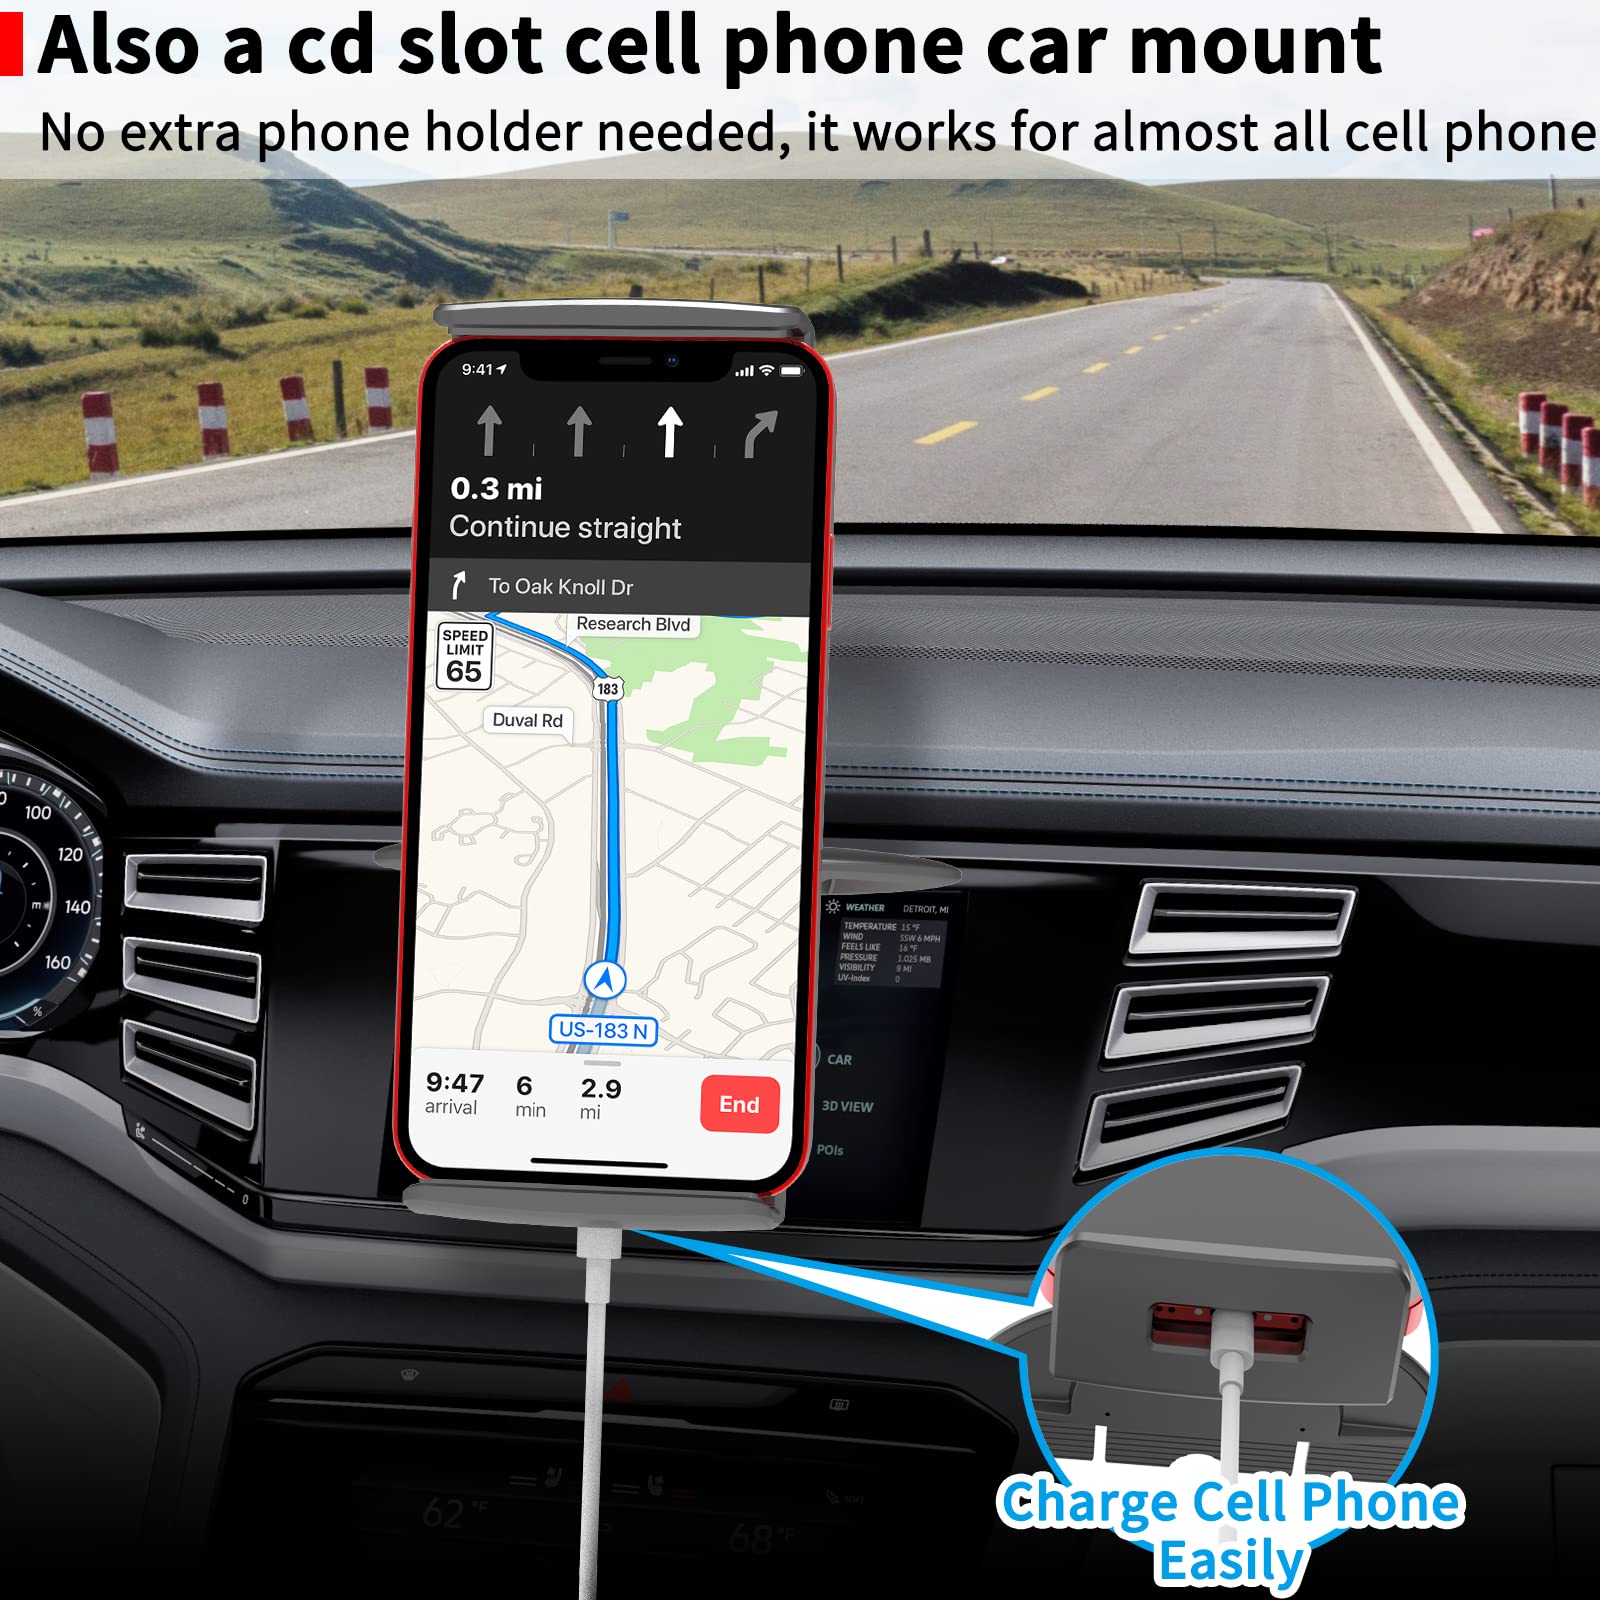 APPS2Car Universal Car Mount [2 in 1] CD Slot Tablet Car Mount for 7-12.4 inch Tablet, CD Player Cell Phone Holder for 3.5-7 inch Smartphone Tablet Car Mount Dash Holder Stand for iPad Pro/Air/Mini